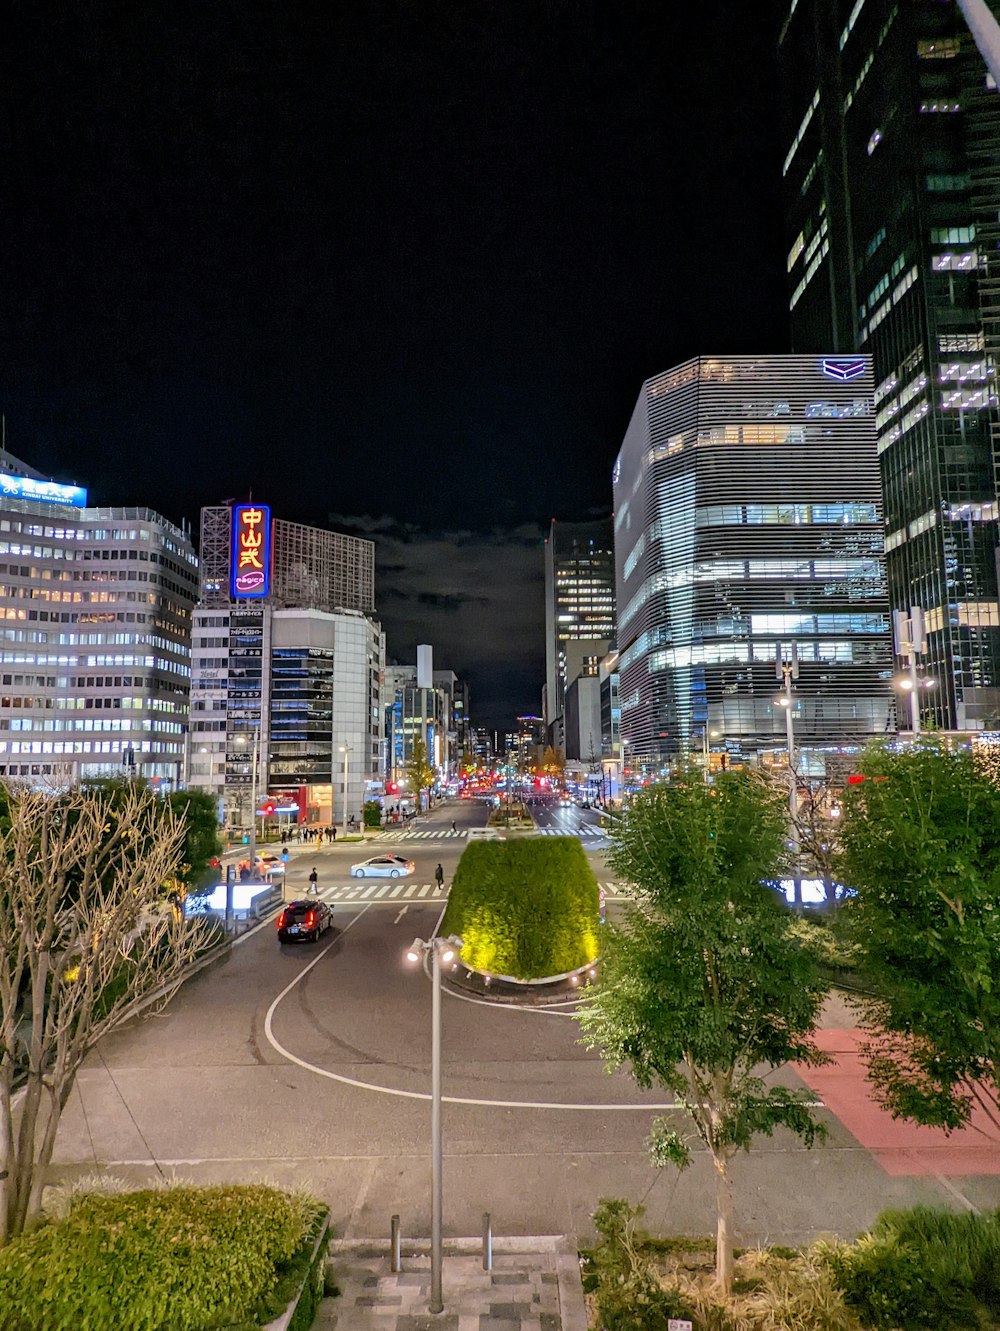 a view of a city street at night